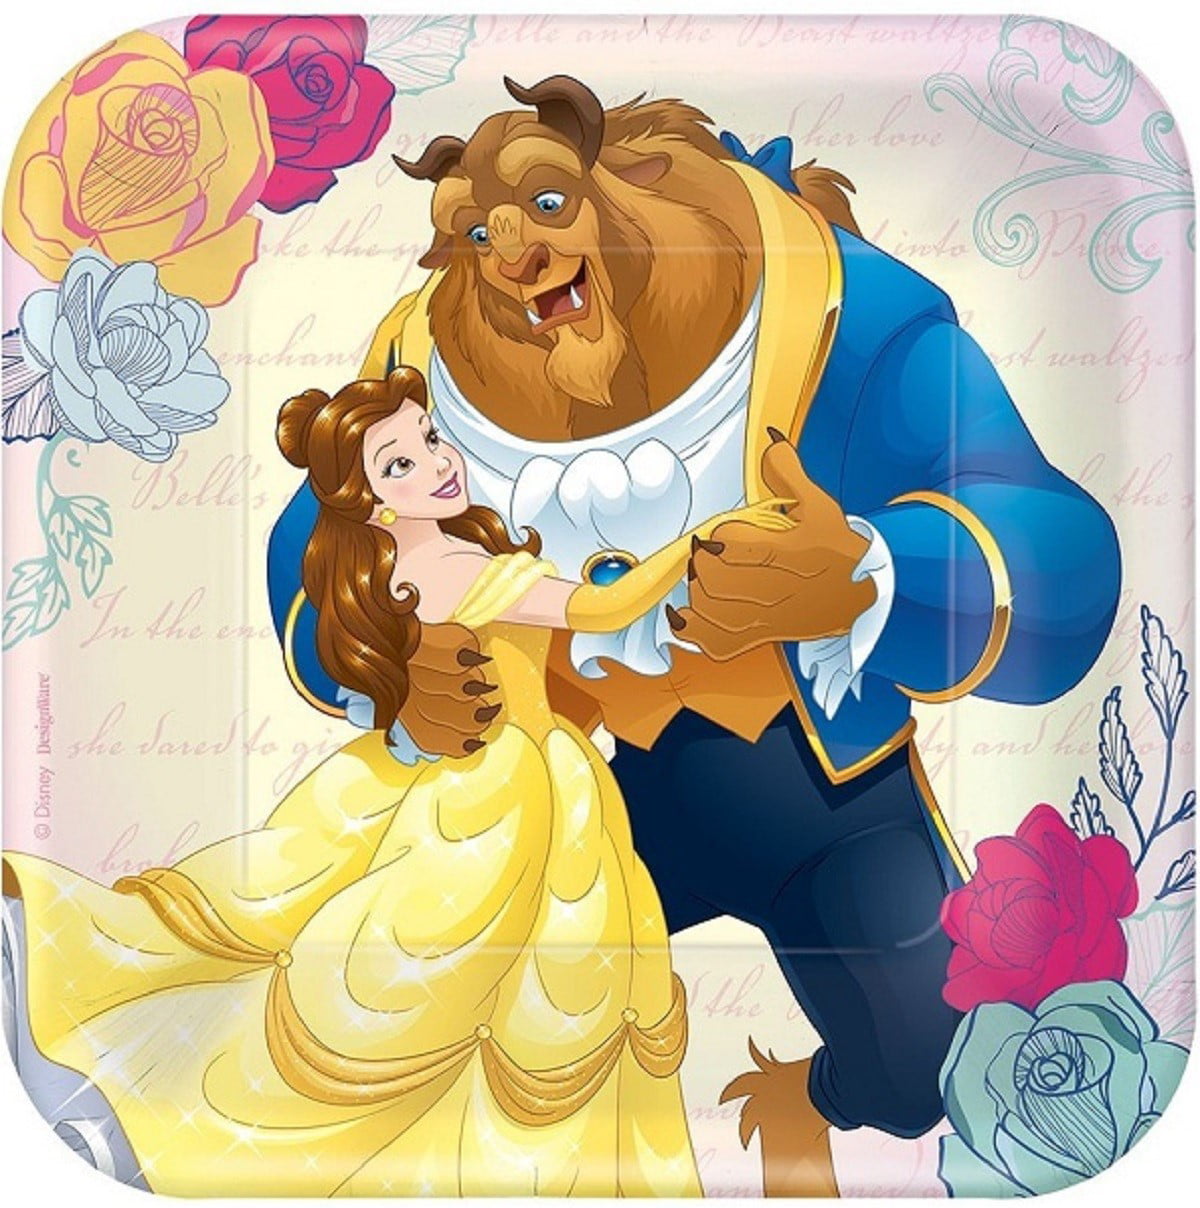 Love's First Dance Includes Hanger Disney's Beauty and the Beast 8 Decorative Plate #7139C